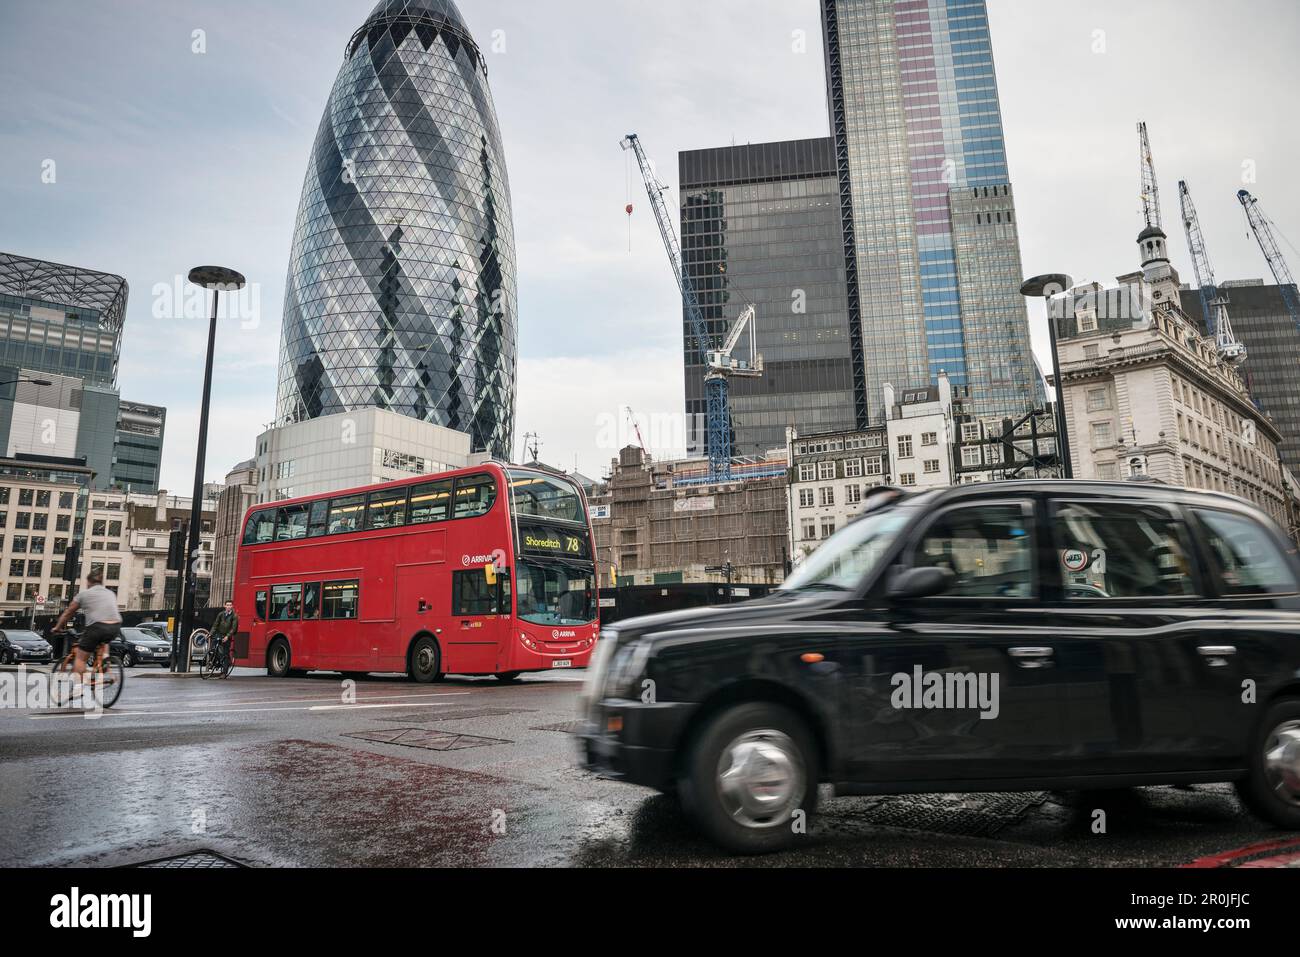 'the Gherkin' by Norman Foster with typical London cab and red bus, Liverpool Street, City of London, England, United Kingdom, Europe Stock Photo